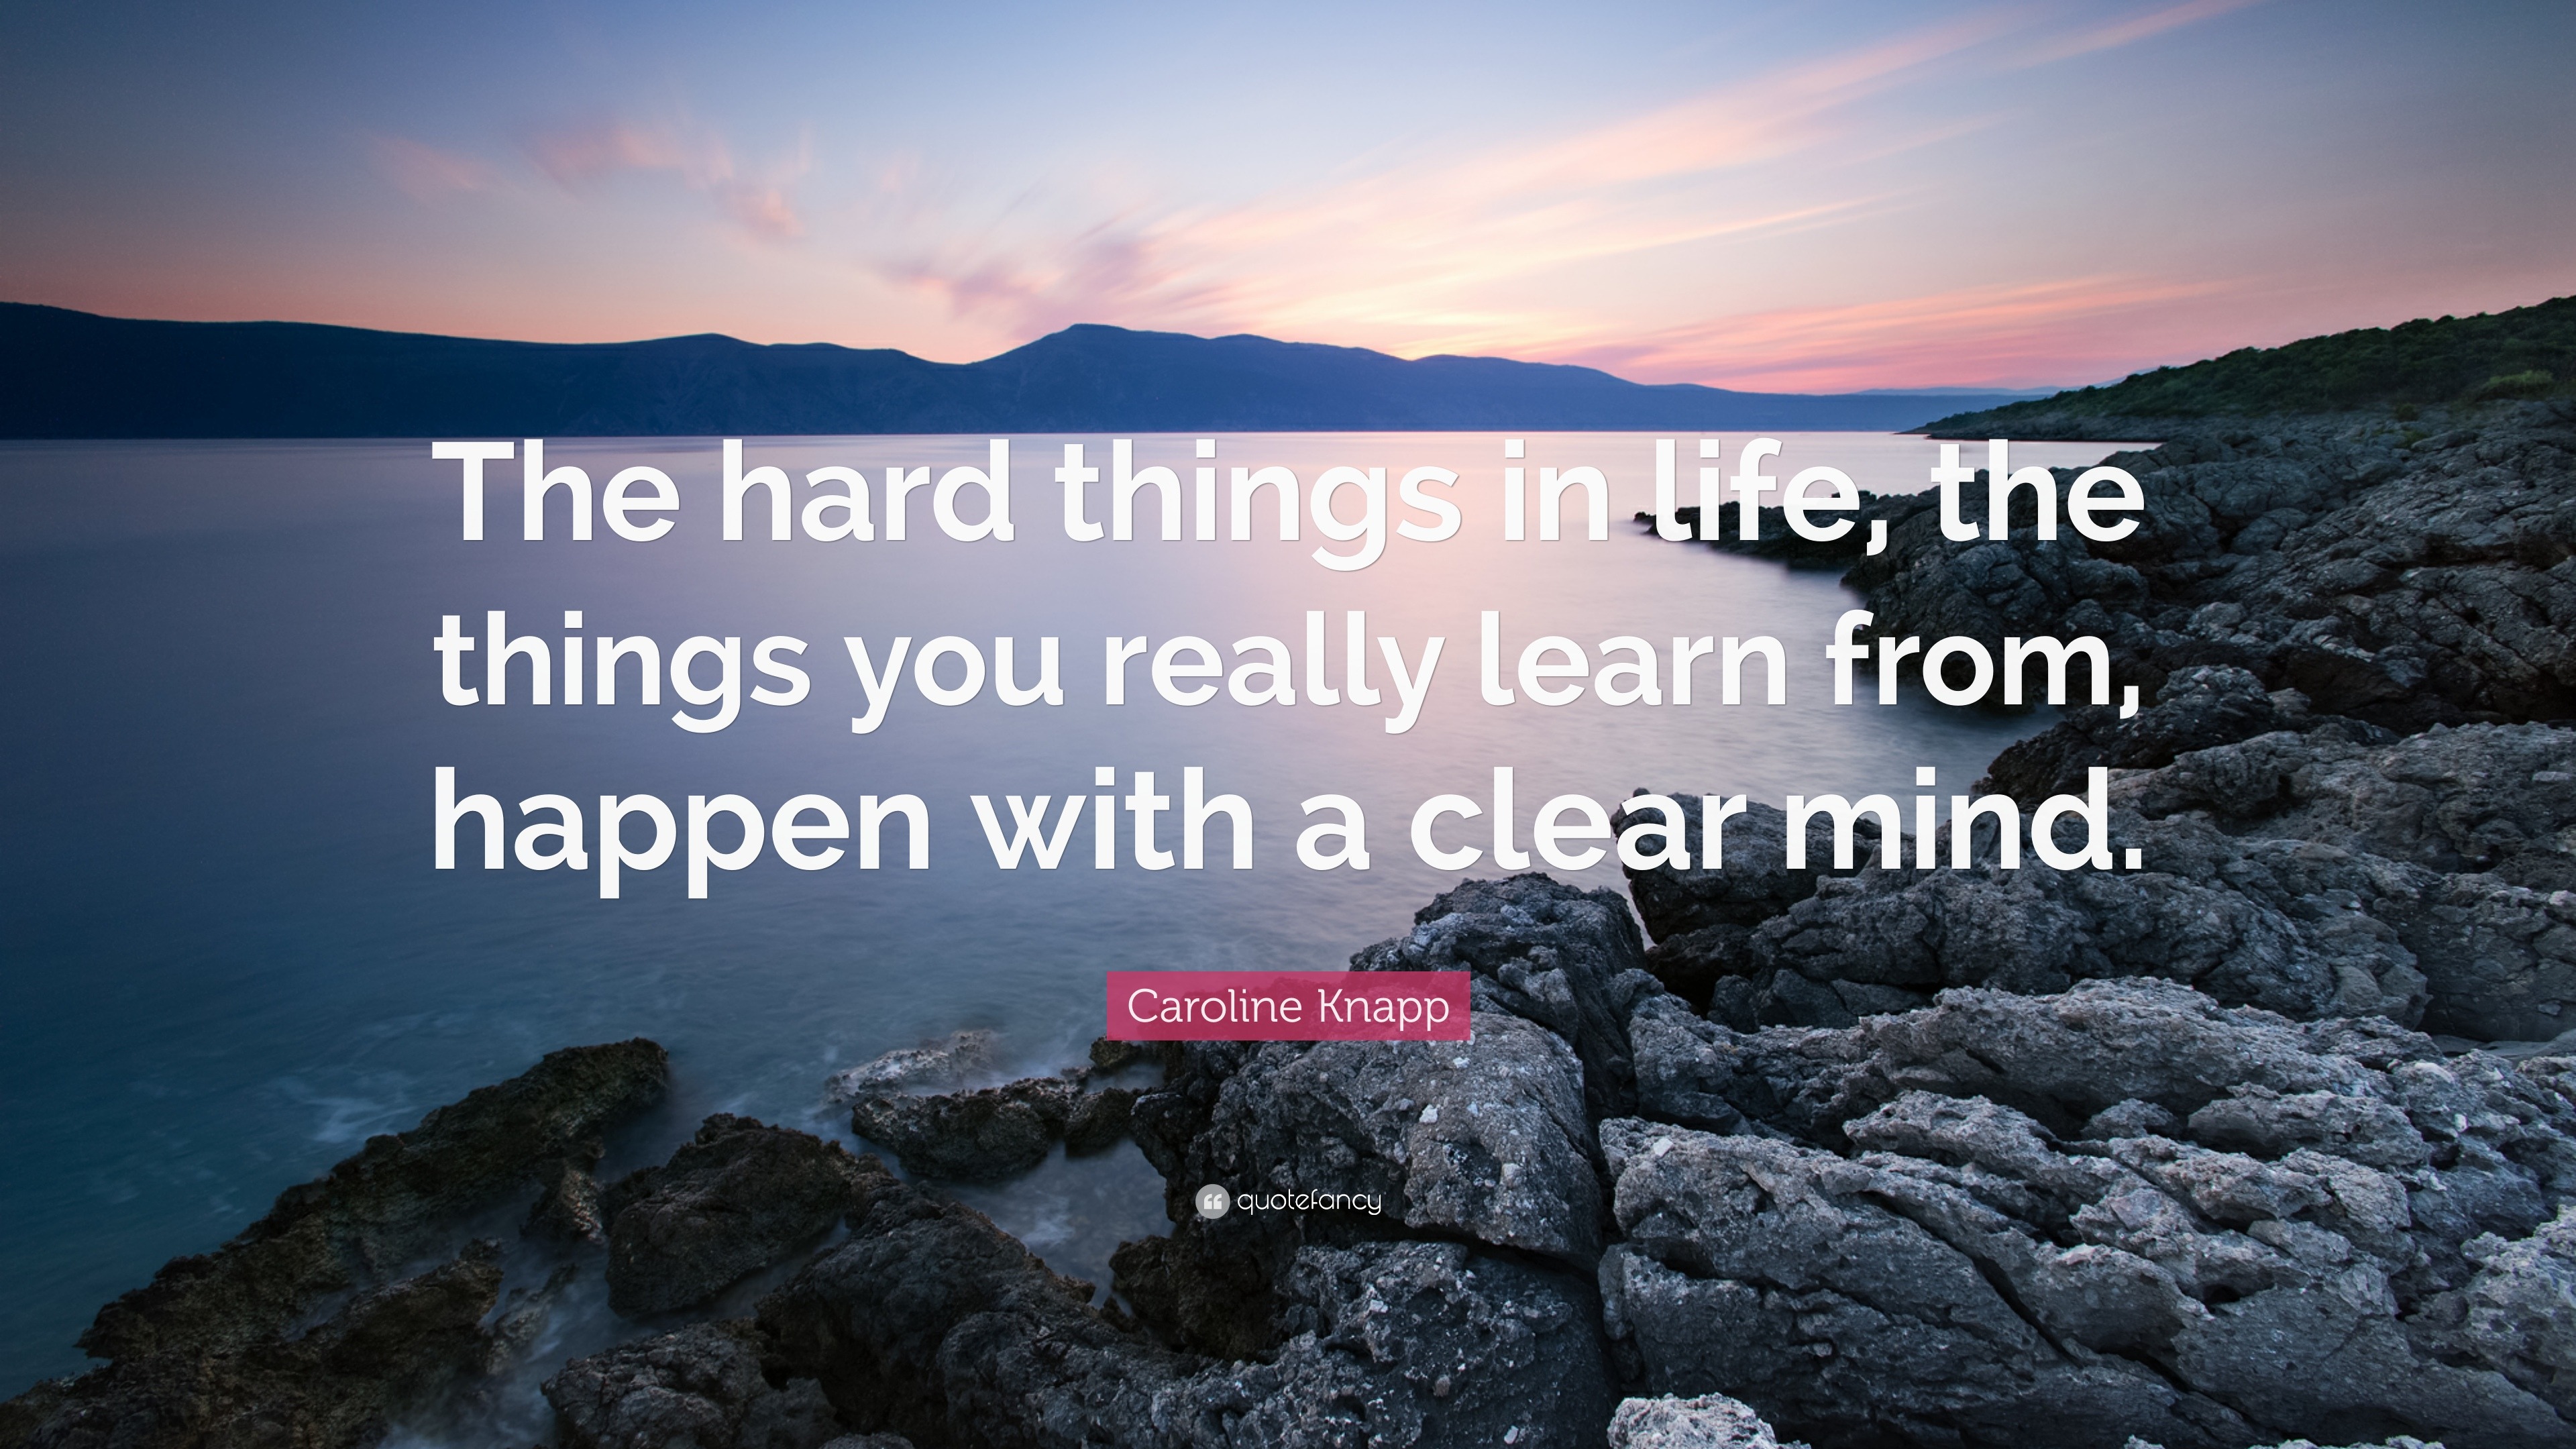 Caroline Knapp Quote “The hard things in life the things you really learn